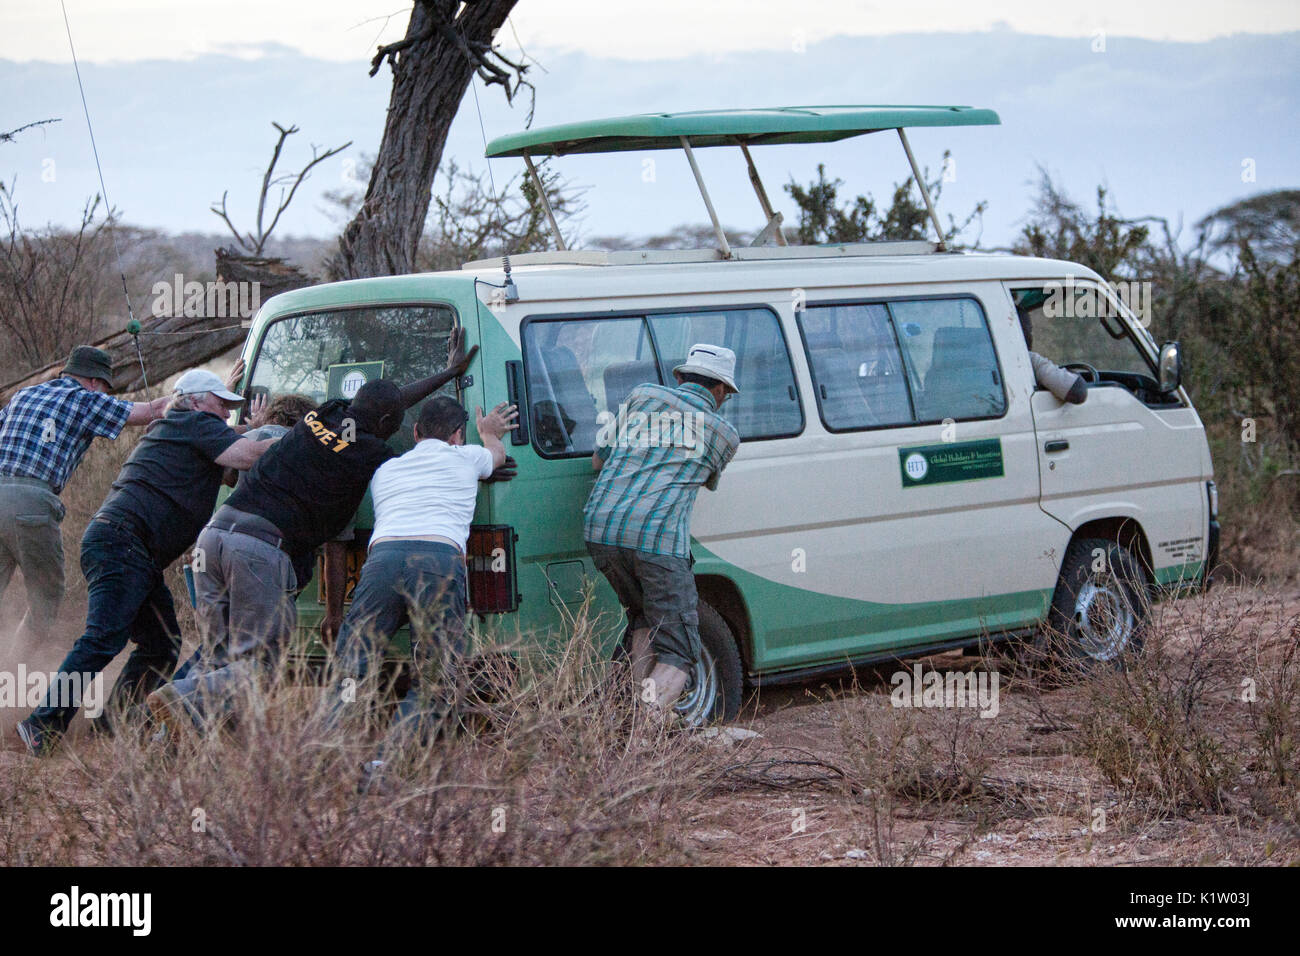 Tourists helping to push out a Safari rig that had gotten stuck in the Samburu National Reserve, Kenya, Africa. Stock Photo